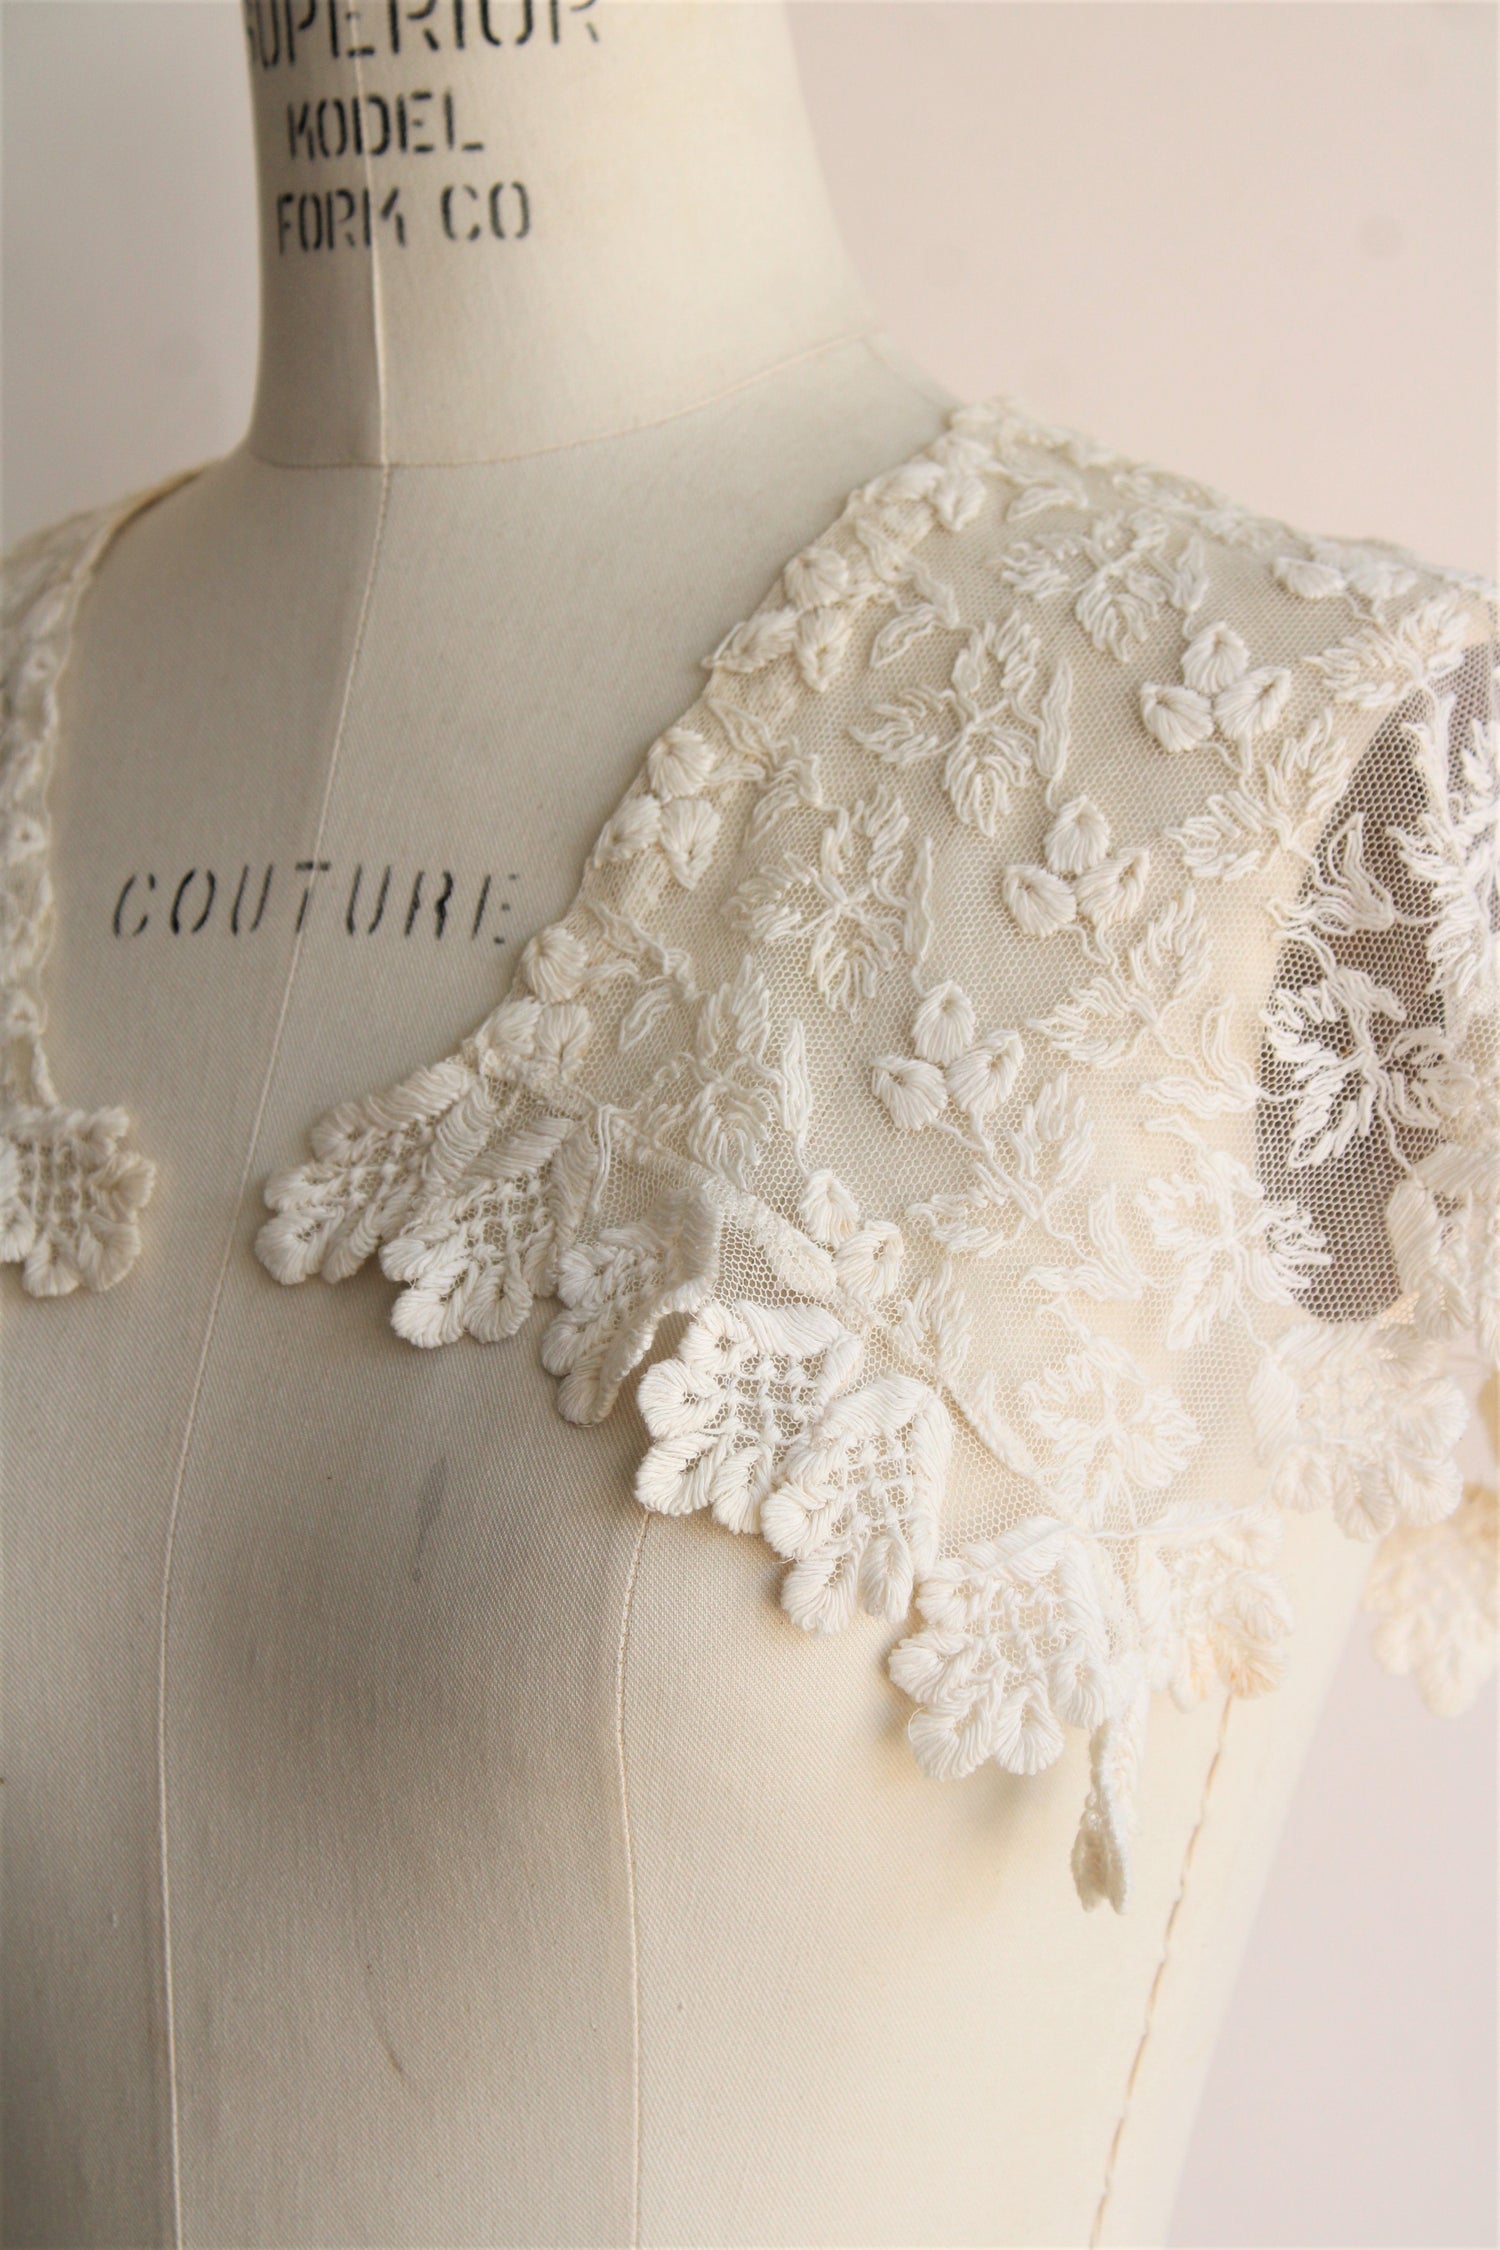 Vintage 1930s 1940s Ivory Lace Shawl Collar